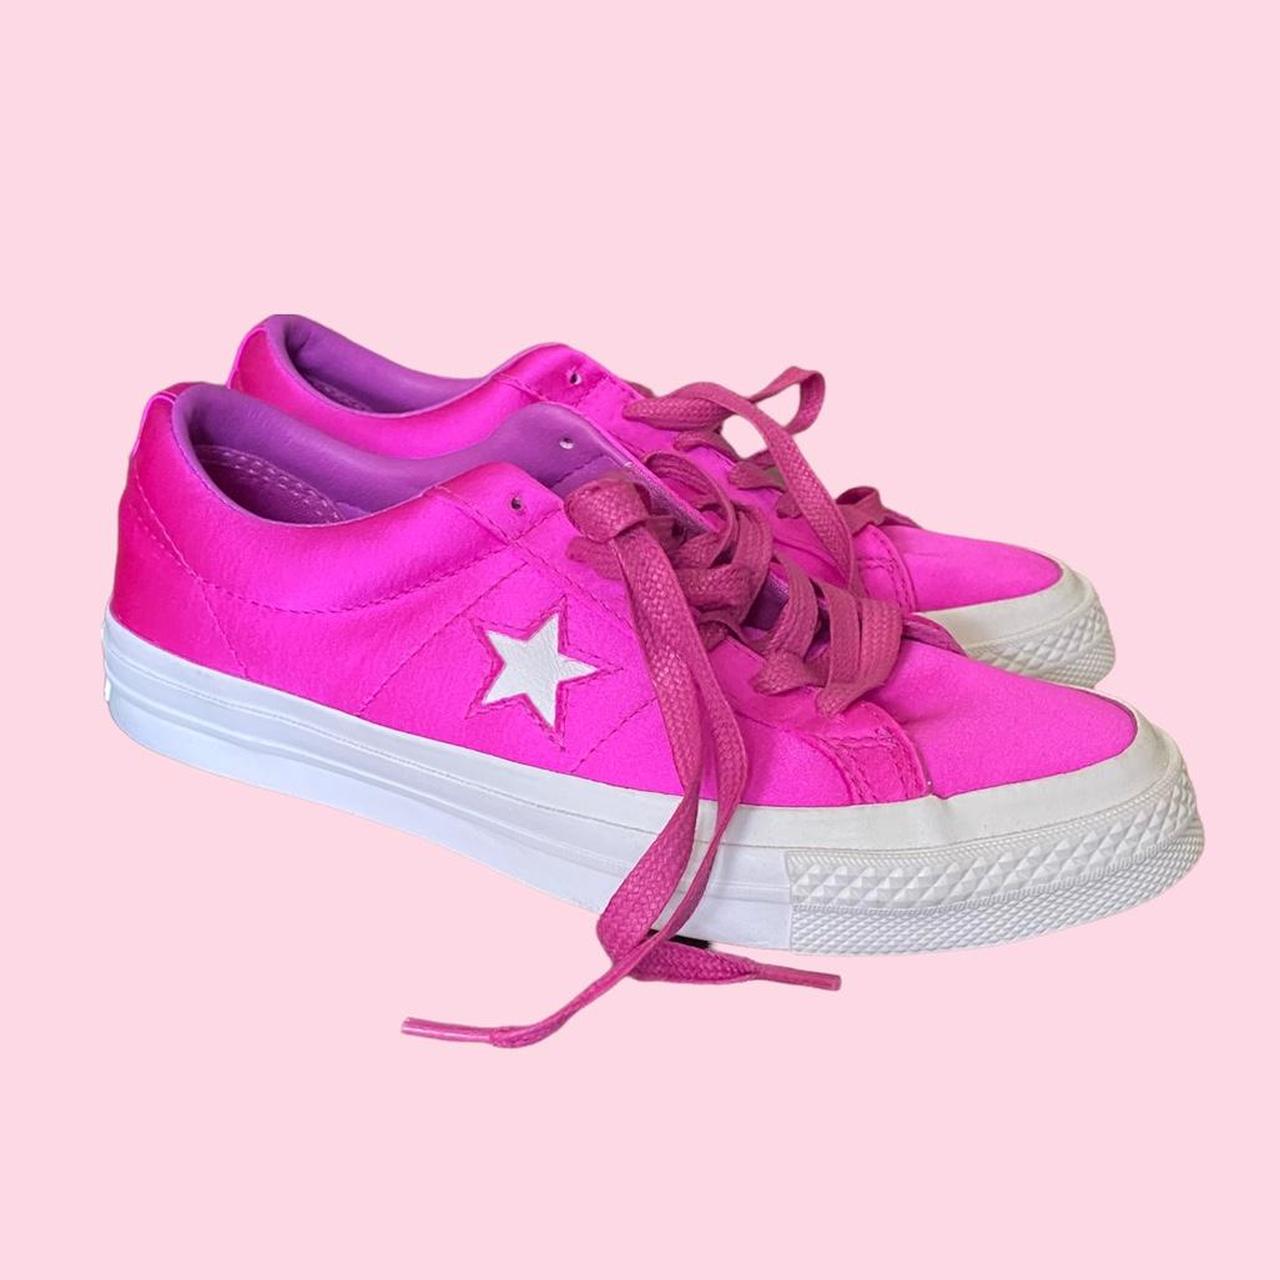 Product Image 1 - Converse one star magenta sneakers
-